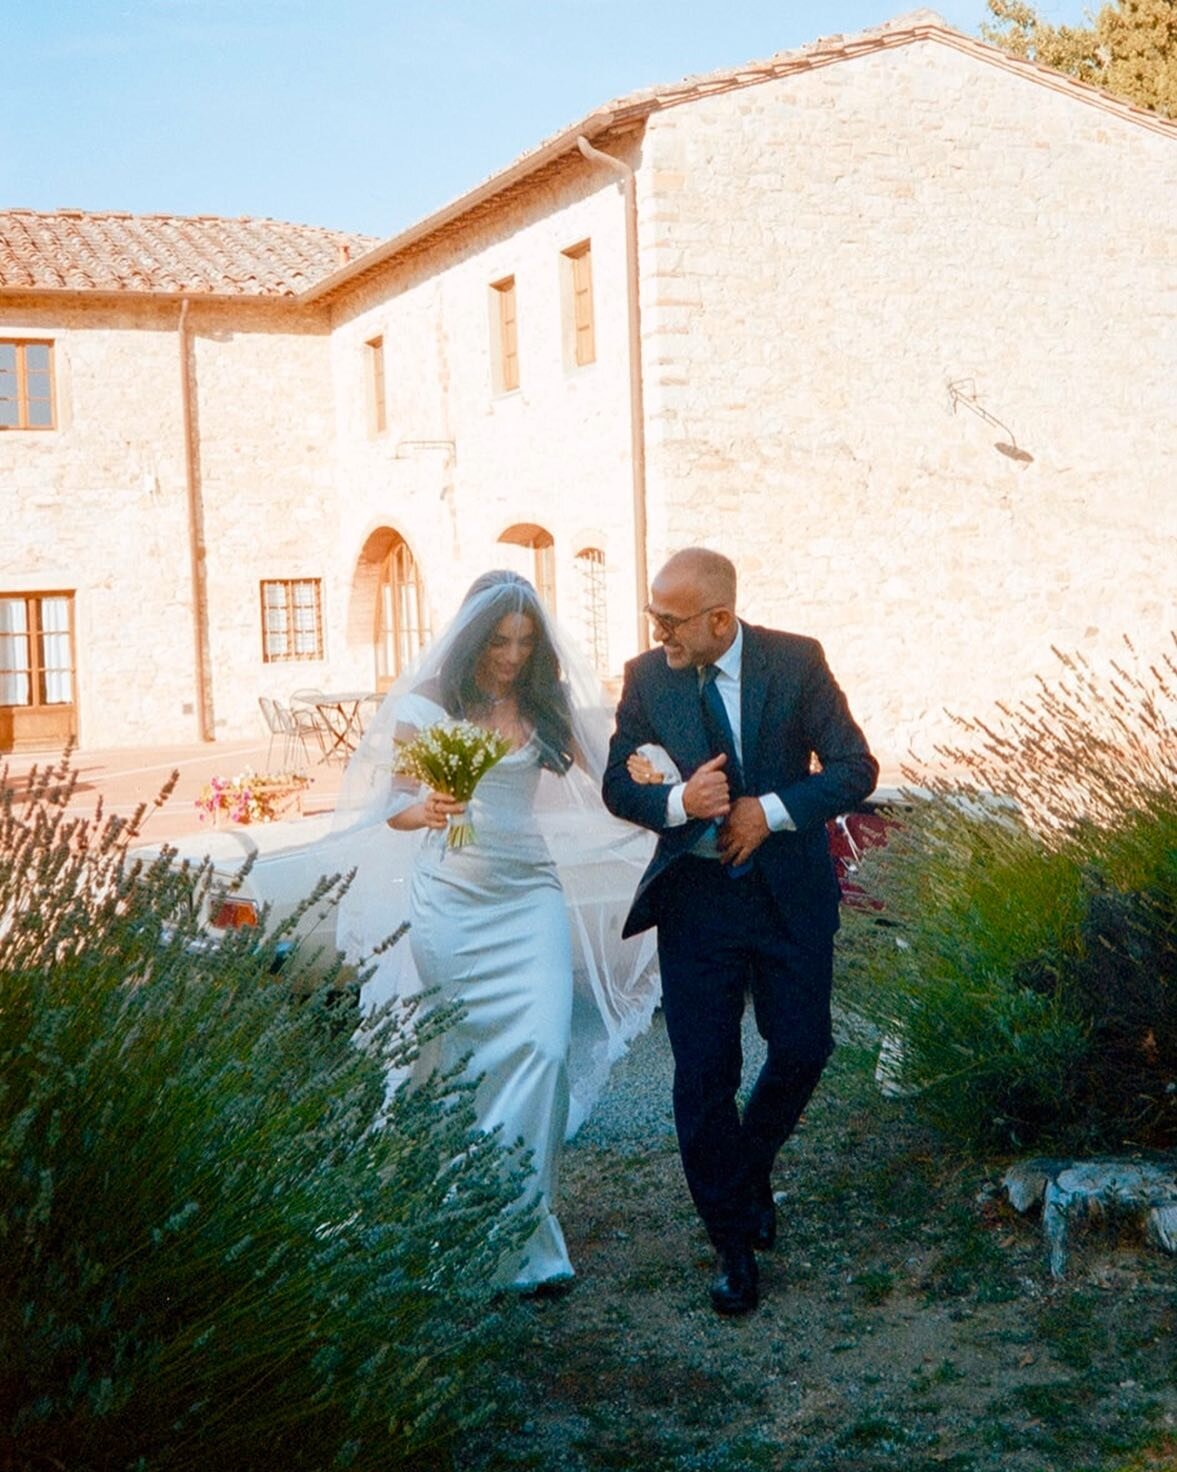 Audrey and her father on a sunny wedding day in early September in Chianti ✨